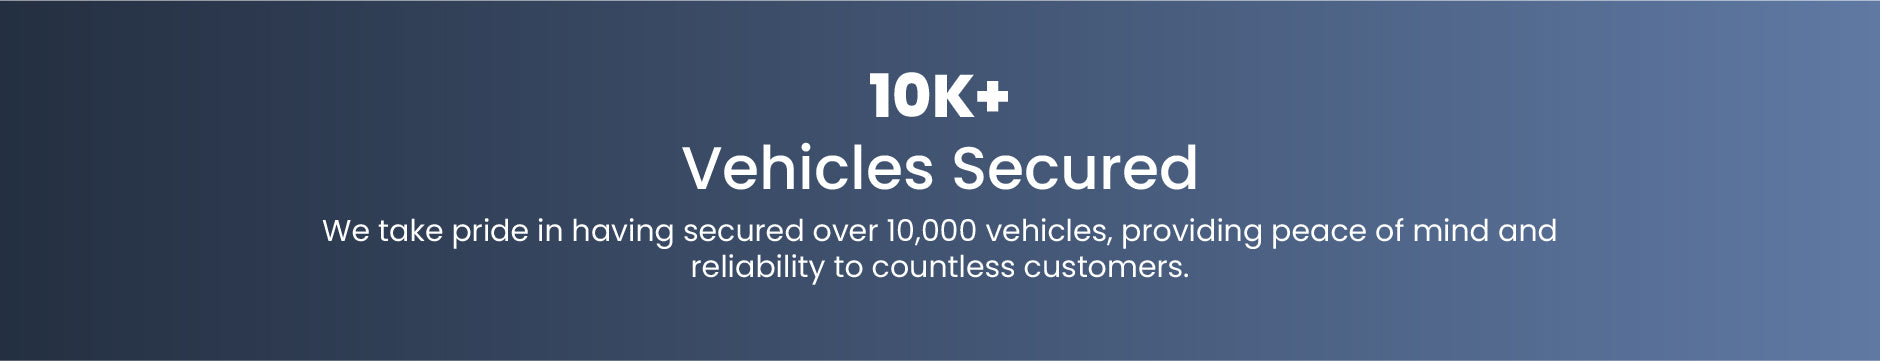 IKIN Home Page - 10K Vehicles secured